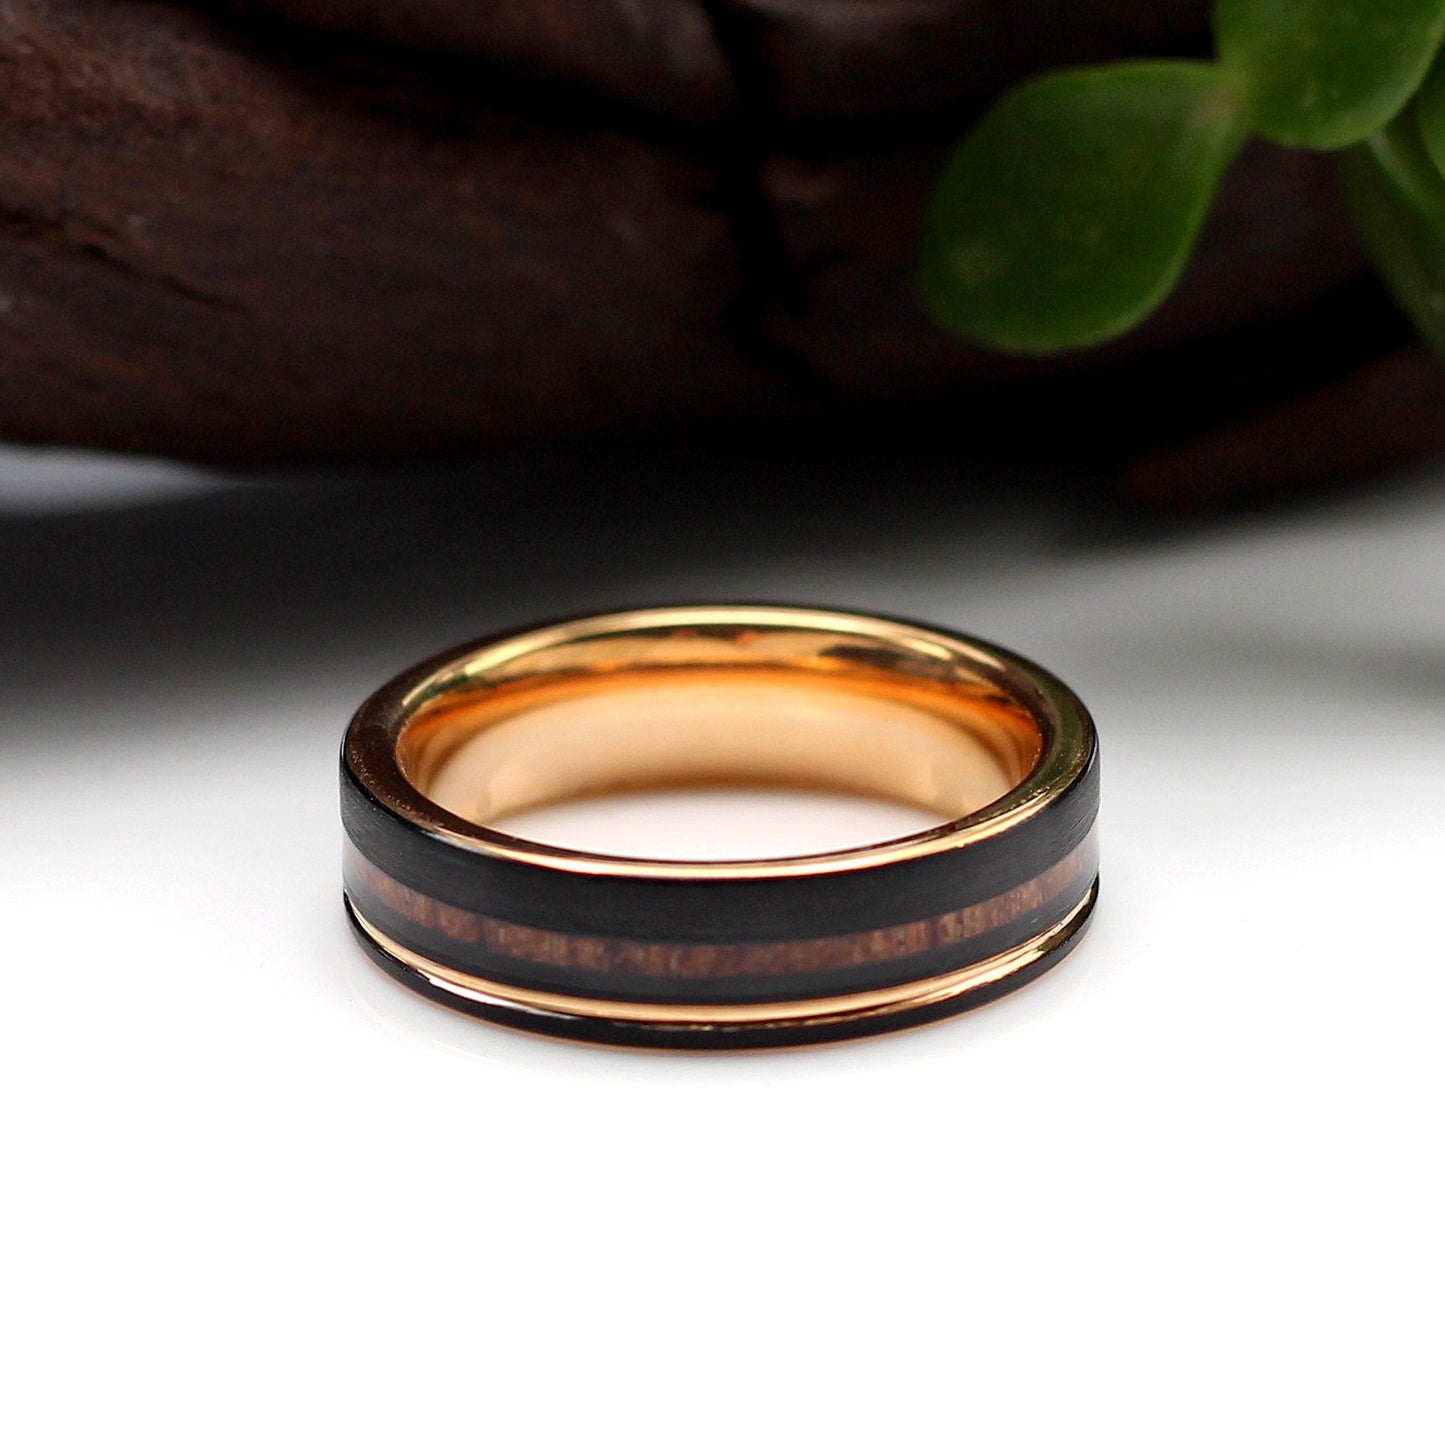 Men's black tungsten 6mm ring with wood inlay and rose gold band. Hashtag Bamboo, orbit rings, NYJ we've got them covered.